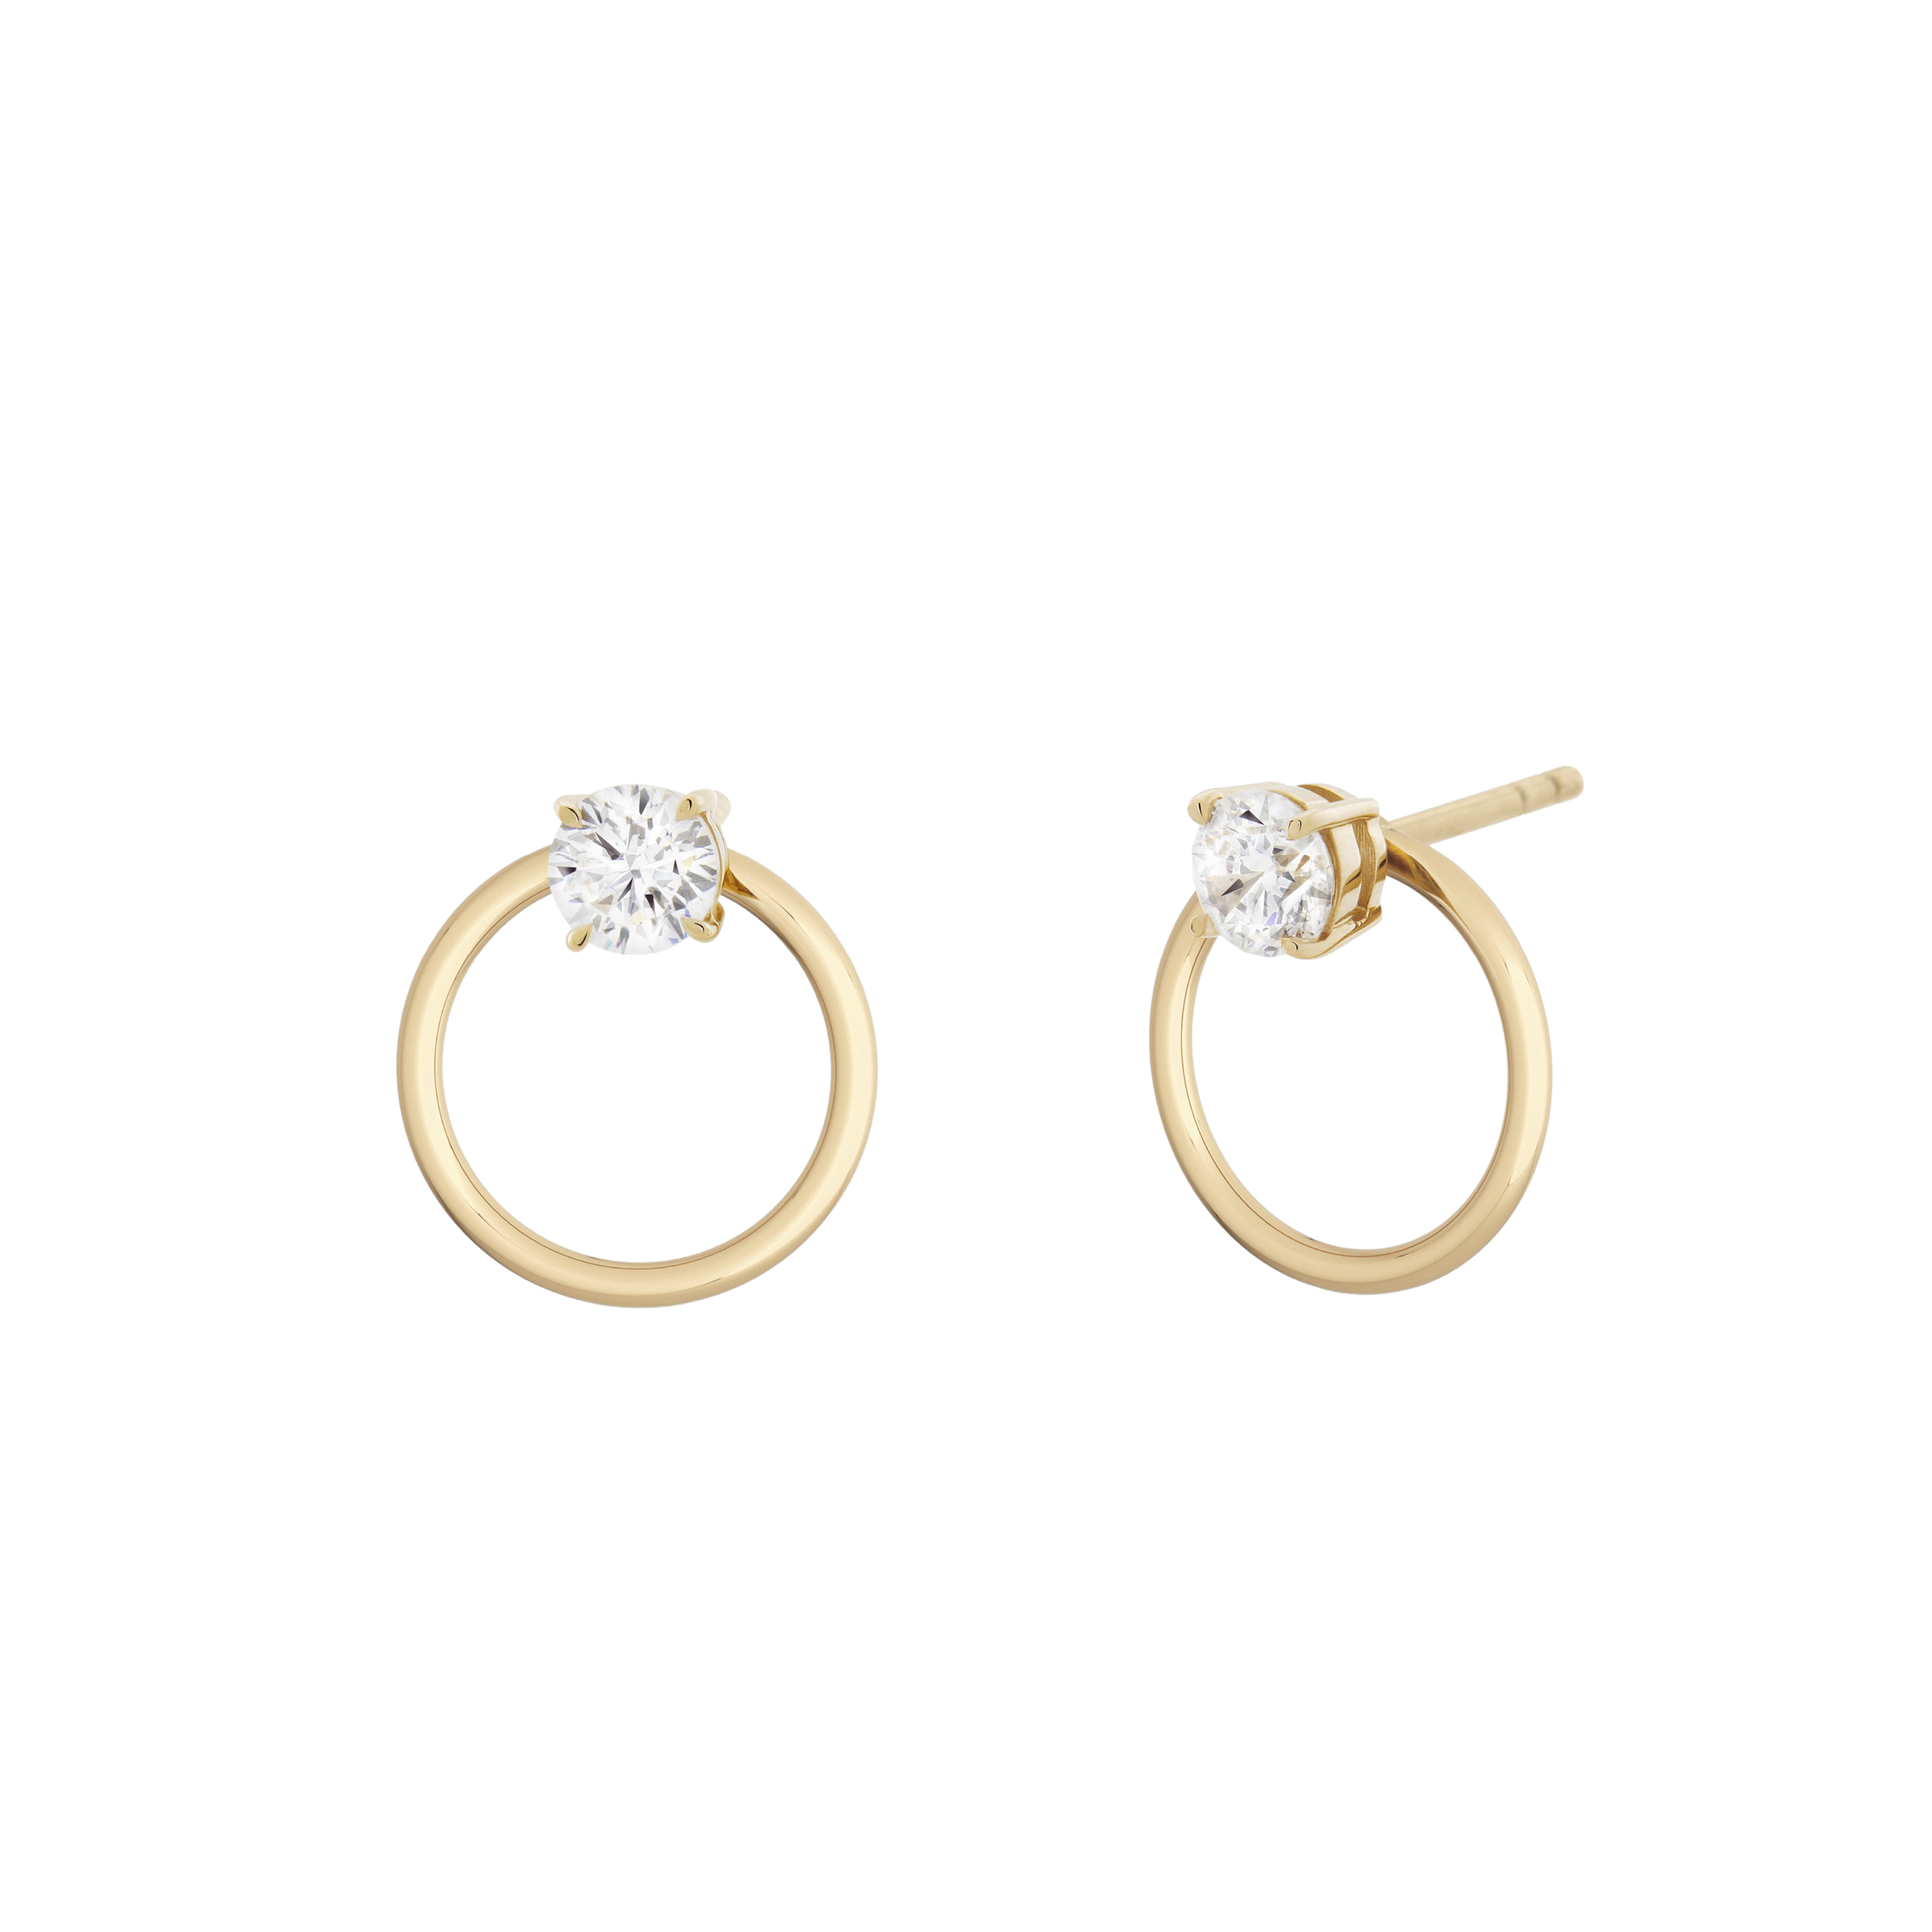 Orla 2-in-1 Diamond Solitaire Earrings. 18k Yellow Gold